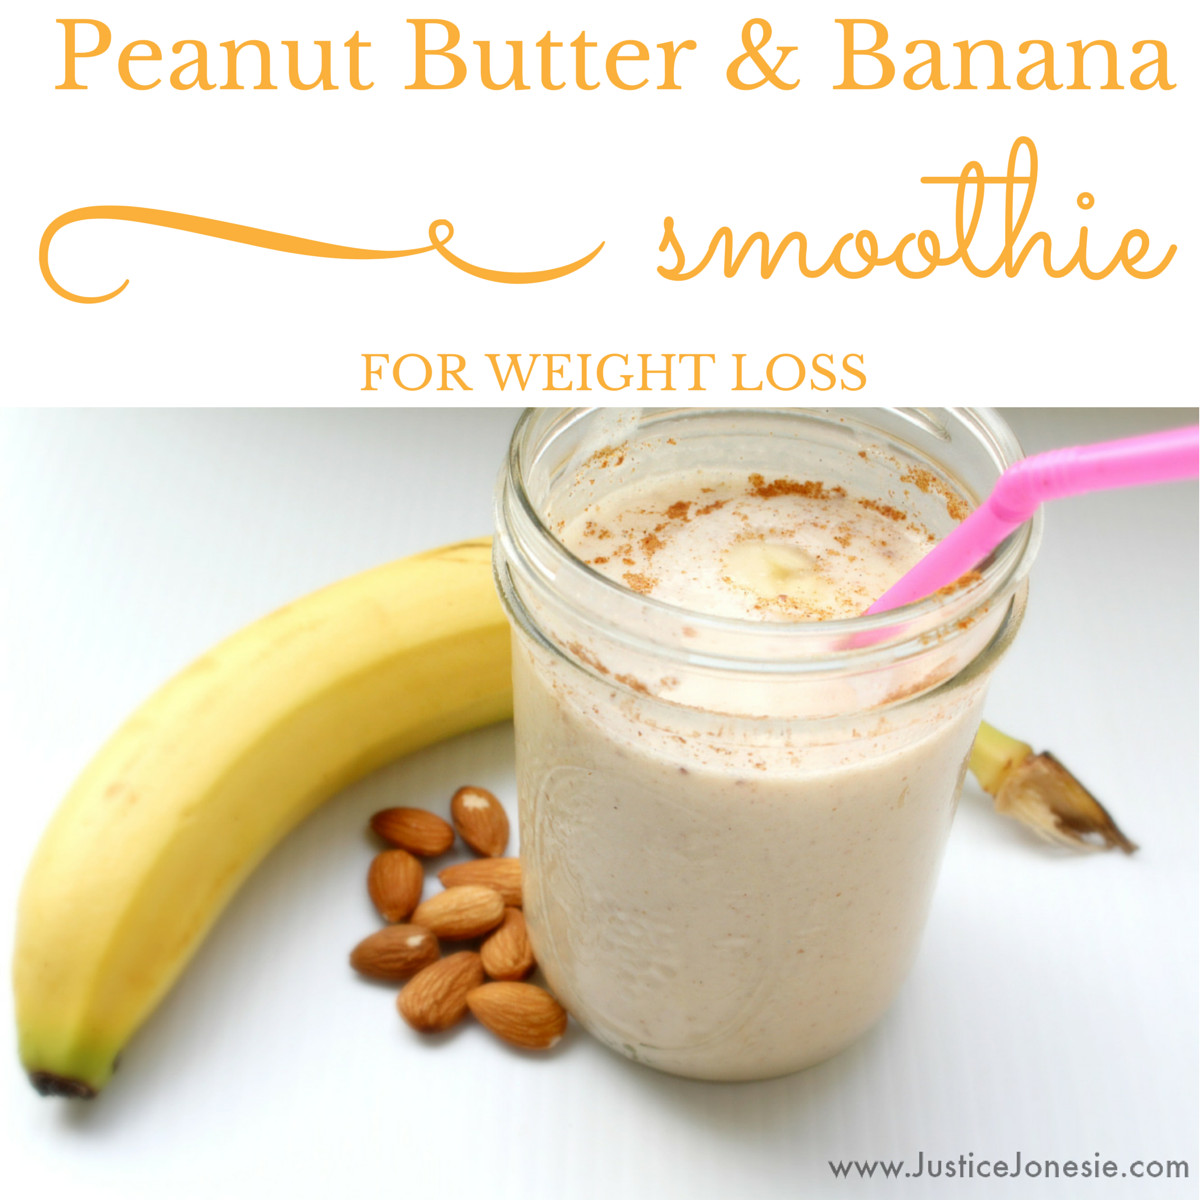 Healthy Banana Smoothie Recipes For Weight Loss
 Easy Peanut Butter And Banana Smoothie for Weight Loss